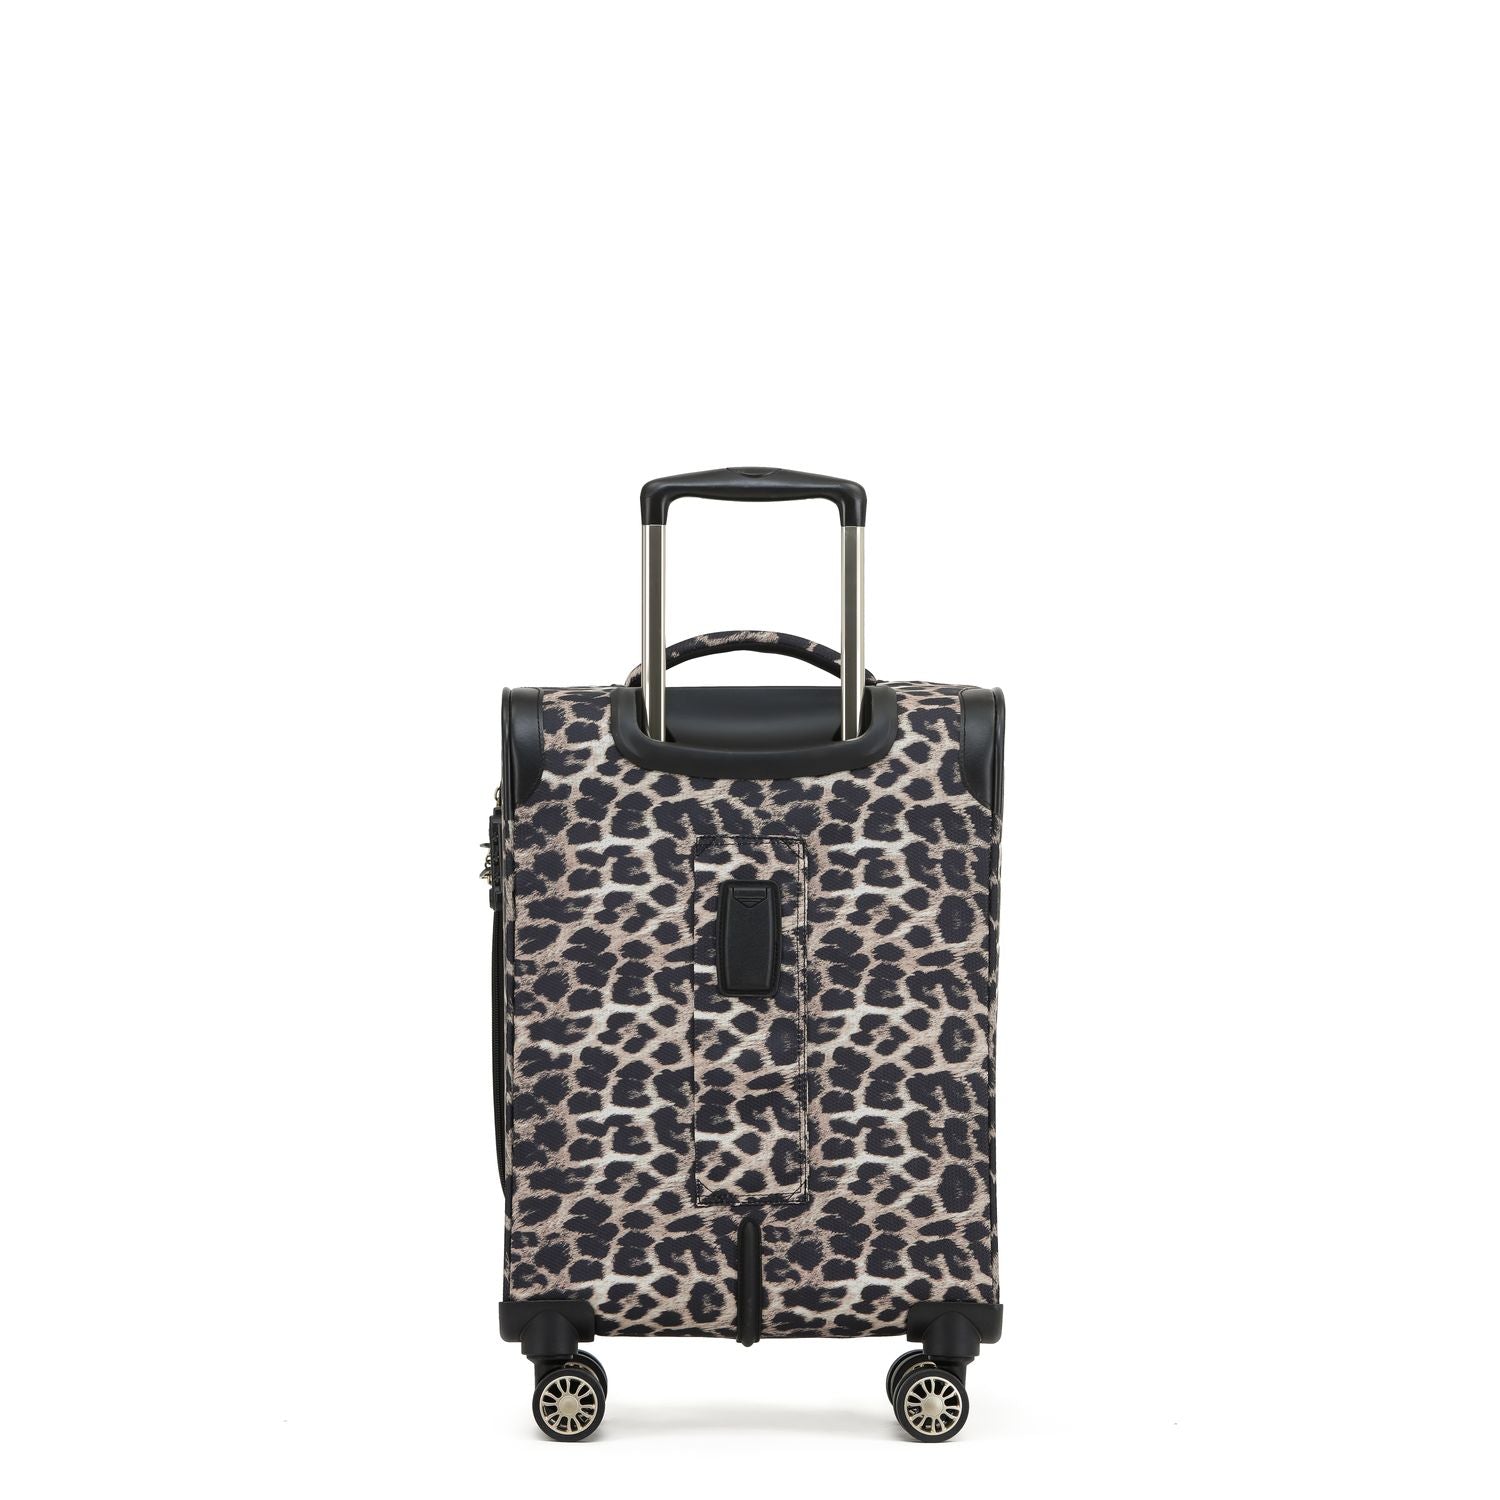 Tosca - So Lite 3.0 20in Small 4 Wheel Soft Suitcase - Leopard-2